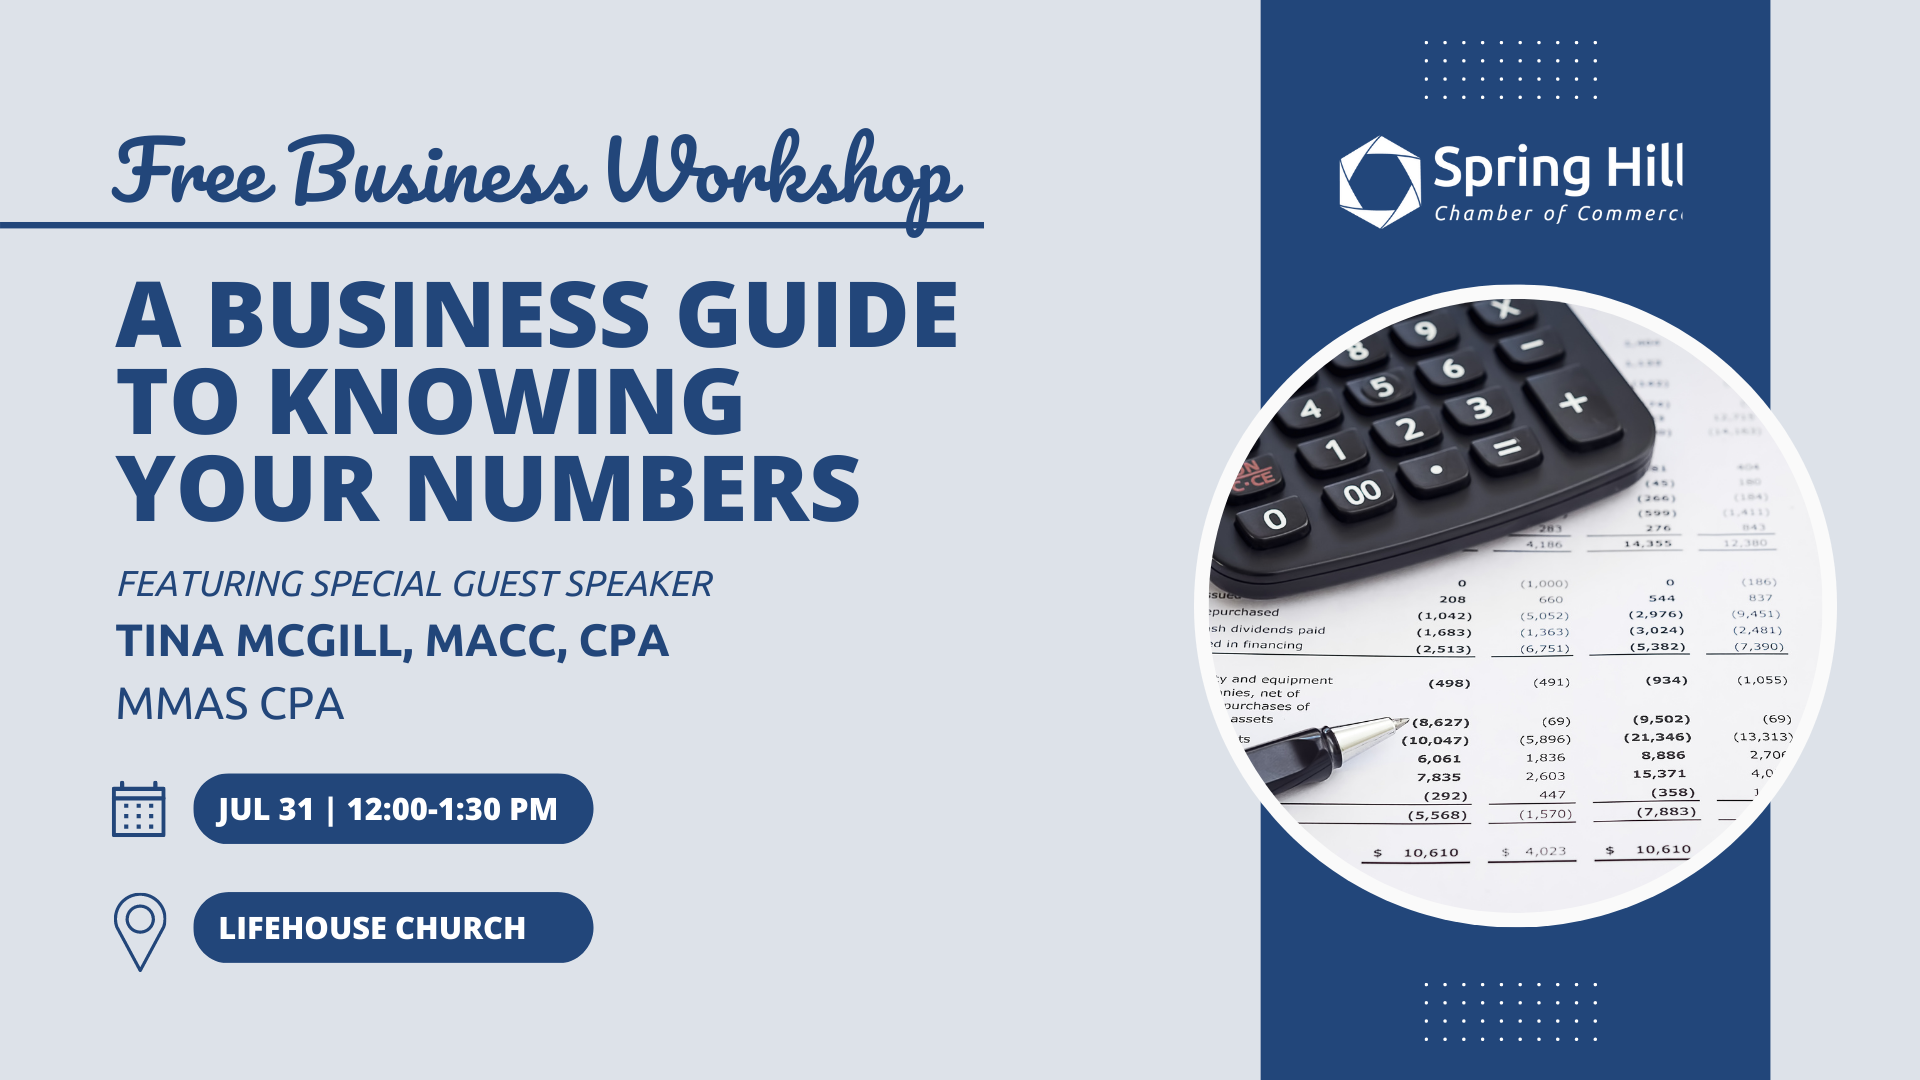 A Business Guide to Knowing Your Numbers Event Image